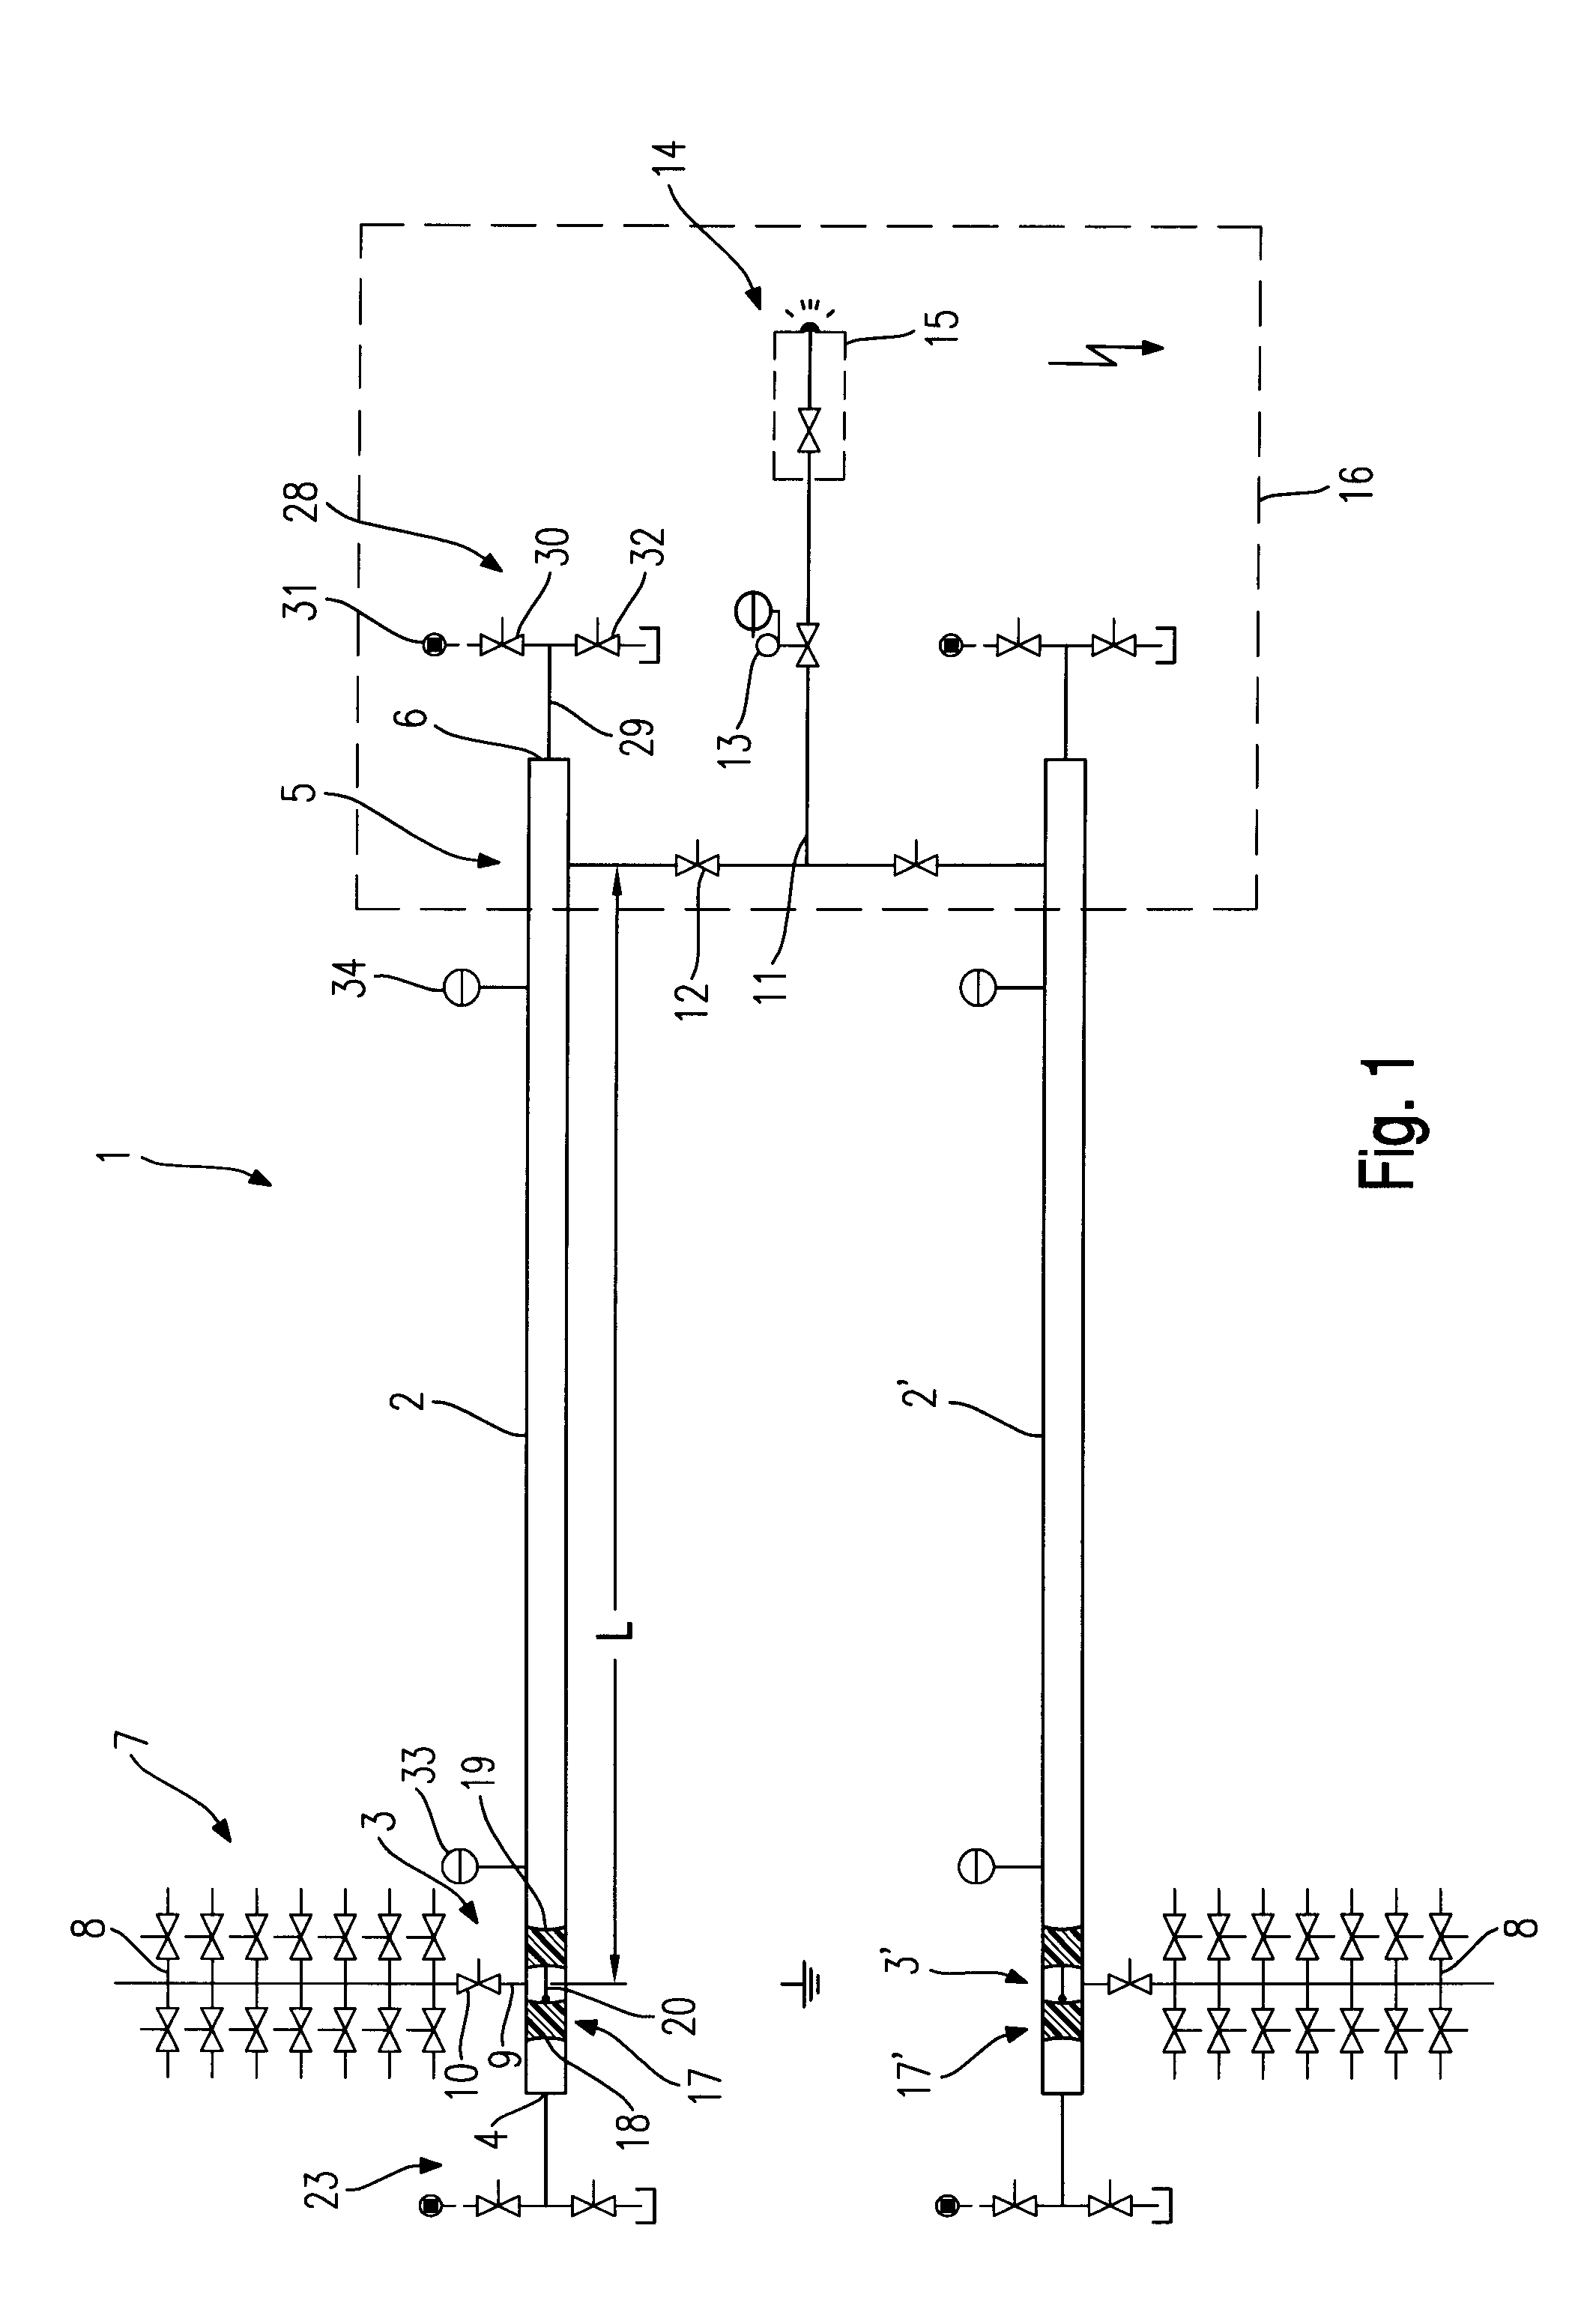 Method and apparatus for conveying electrically conductive paints between different voltage potentials